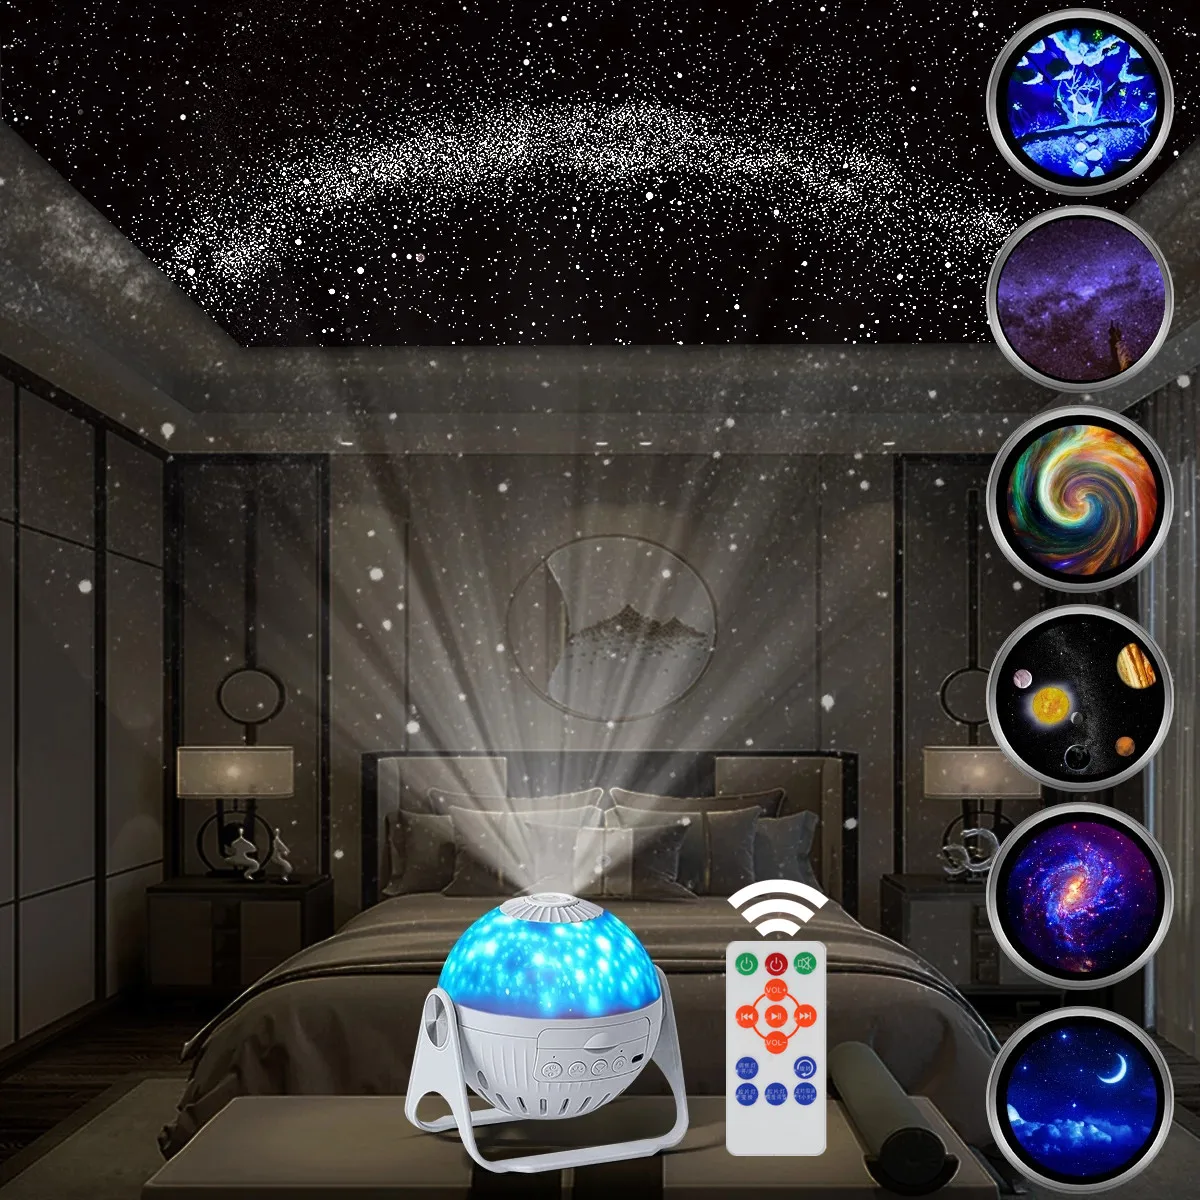 

13 in 1 LED Star Projector Night Light 360° Rotate Planetarium Galaxy Starry Sky Projector Lamp for Room Decor Kids Nightlights